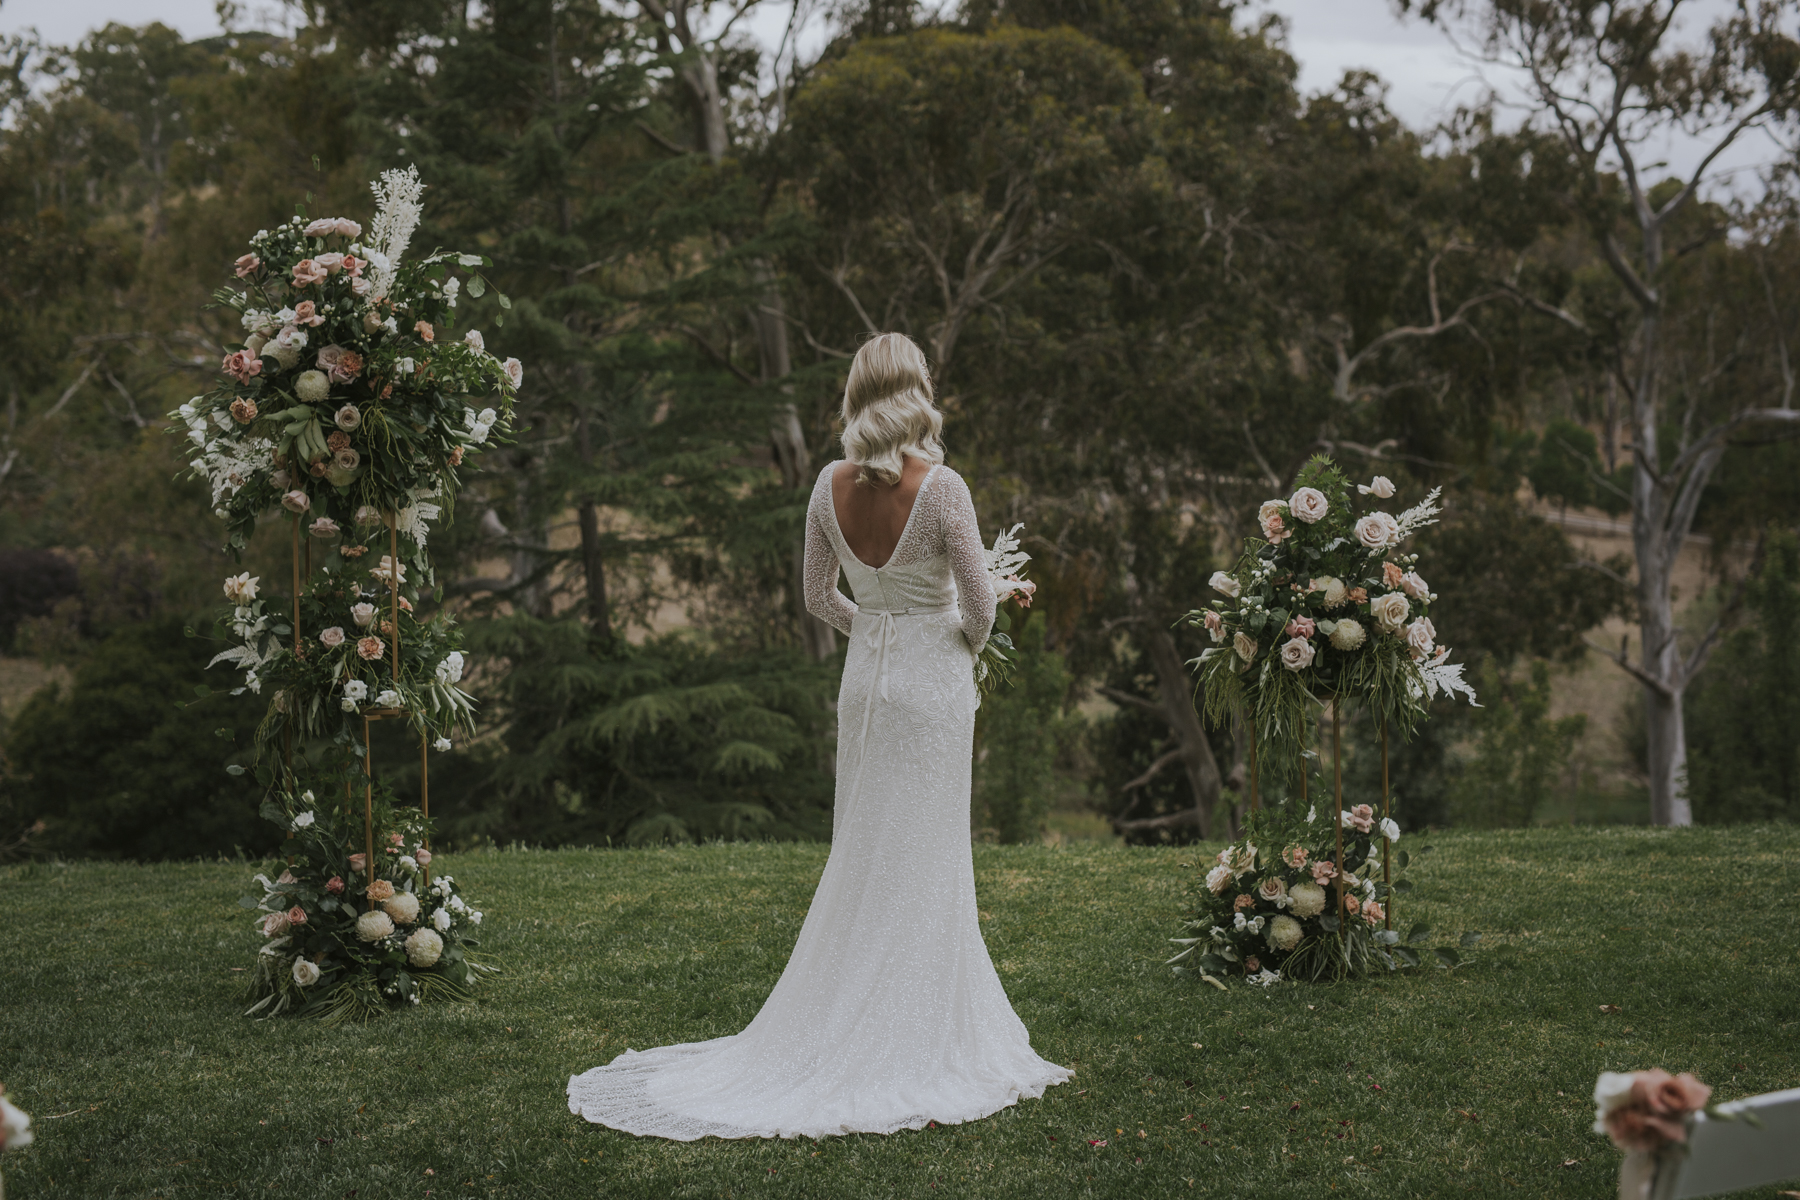 Templewood House, Inglewood, Adelaide Hills Wedding Venue, Country Property on the Outskirts of the City, Drinks Service, Flexible Catering Space suitable ceremony and receptions